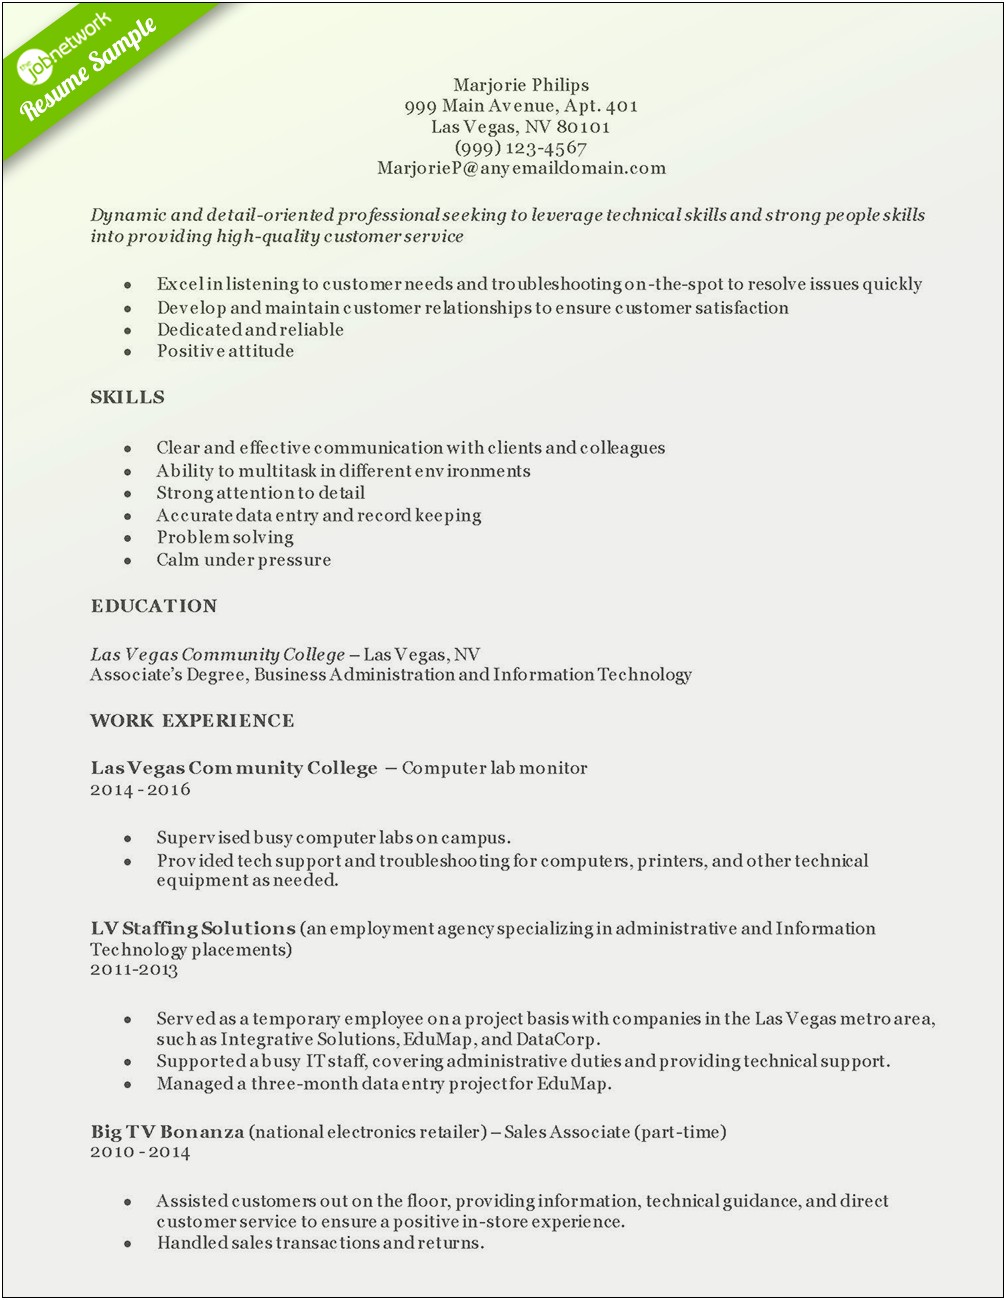 Sample Resume With Associates Degree Listed